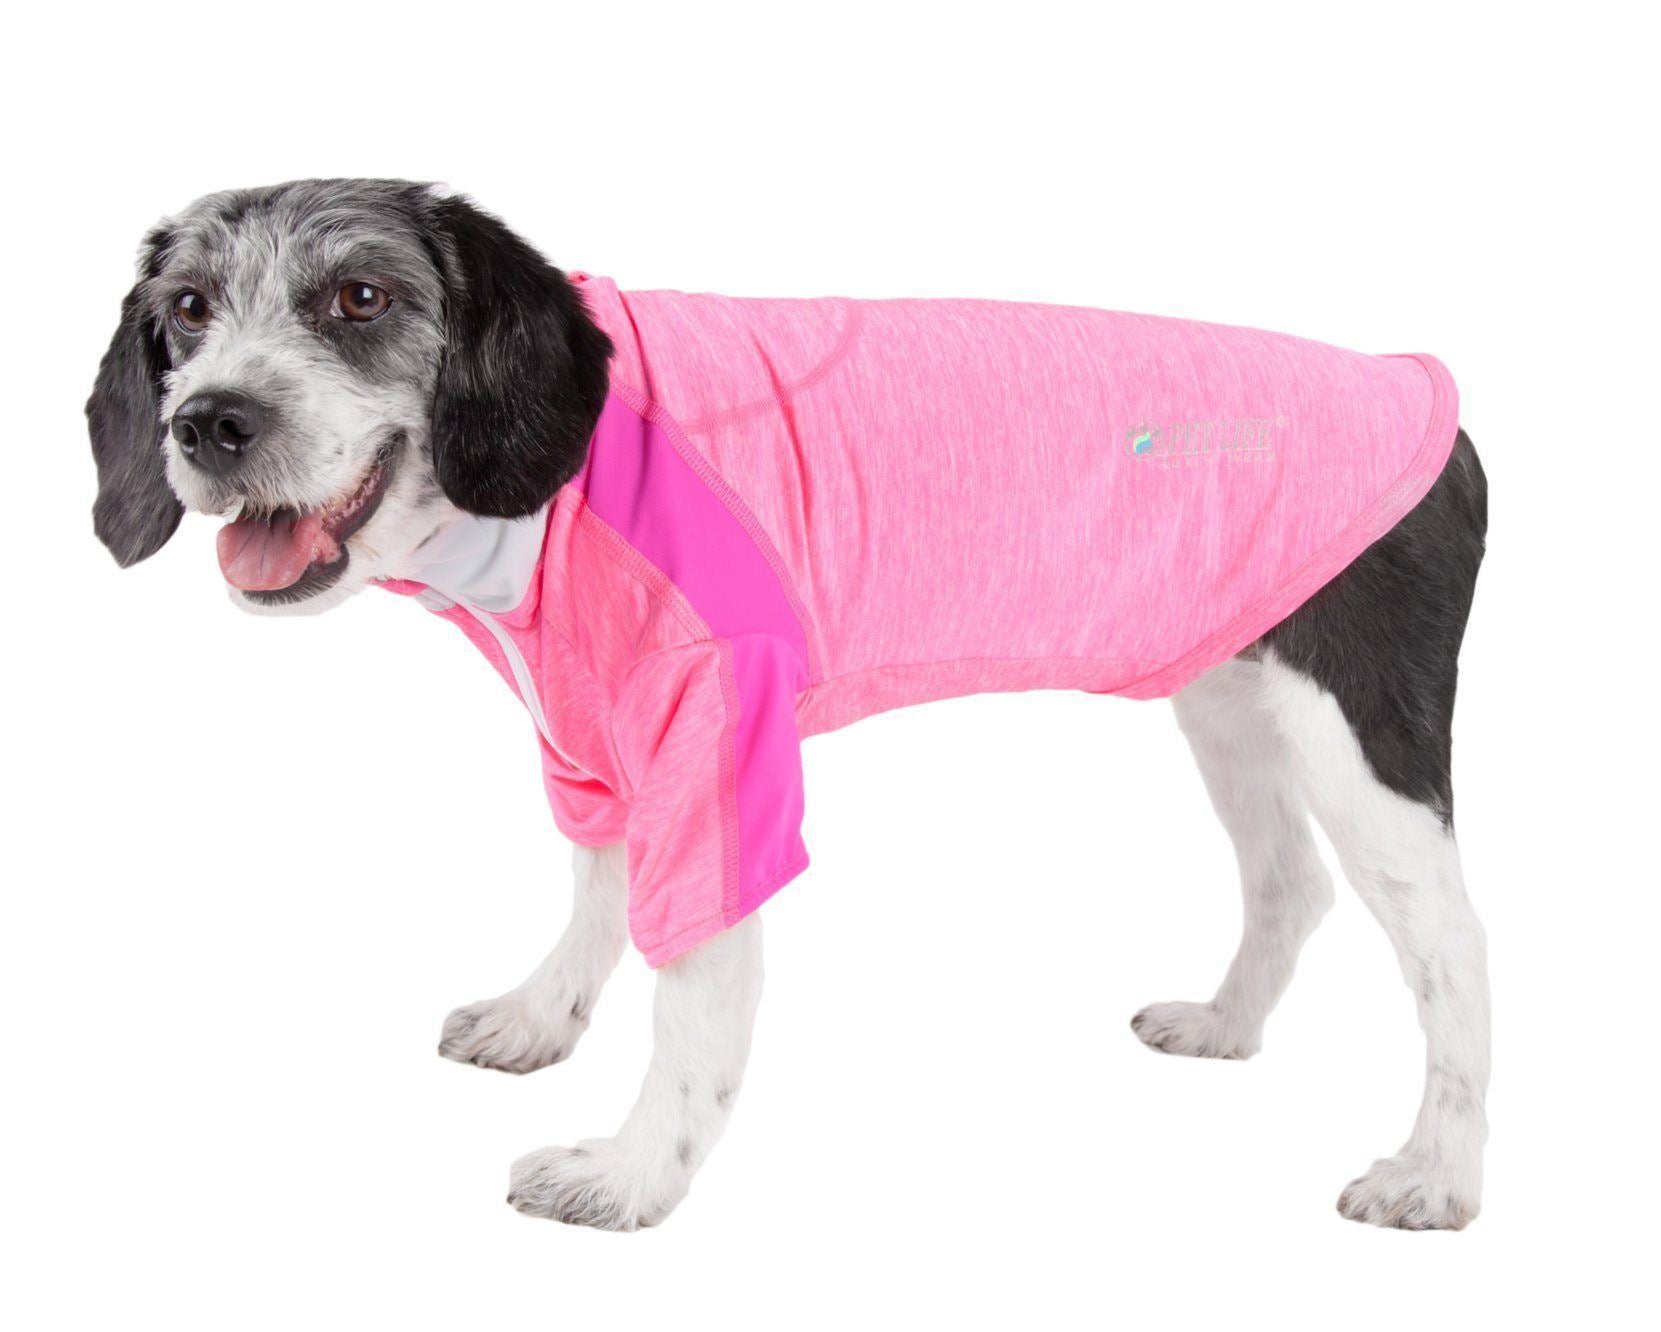 Pet Life ® Active 'Chewitt Wagassy' 4-Way-Stretch Yoga Fitness Long-Sleeve Dog T-Shirt X-Small Light Pink